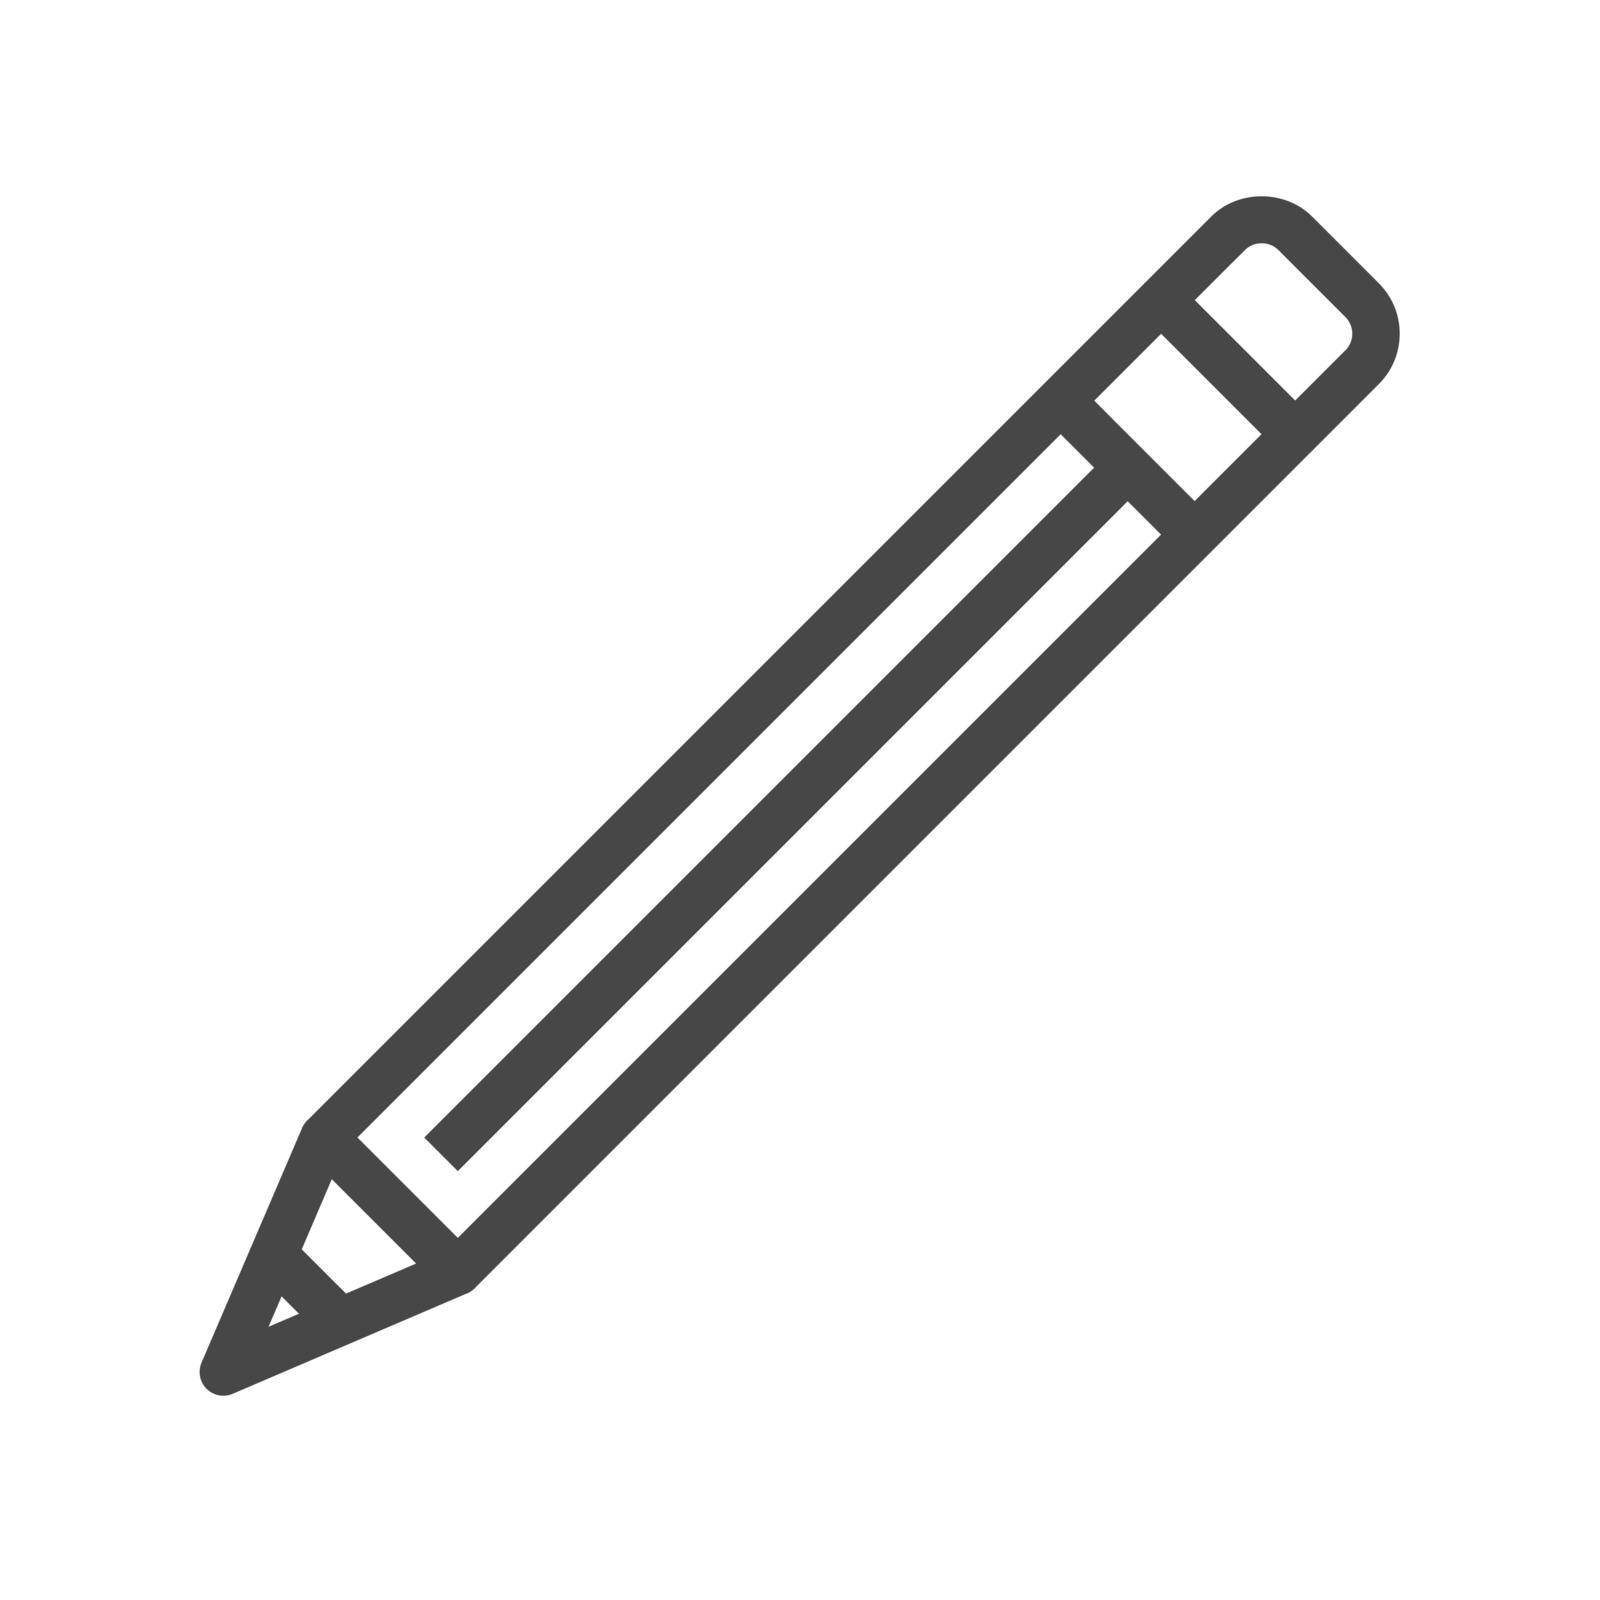 Pencil Thin Line Vector Icon. Flat icon isolated on the white background. Editable EPS file. Vector illustration.